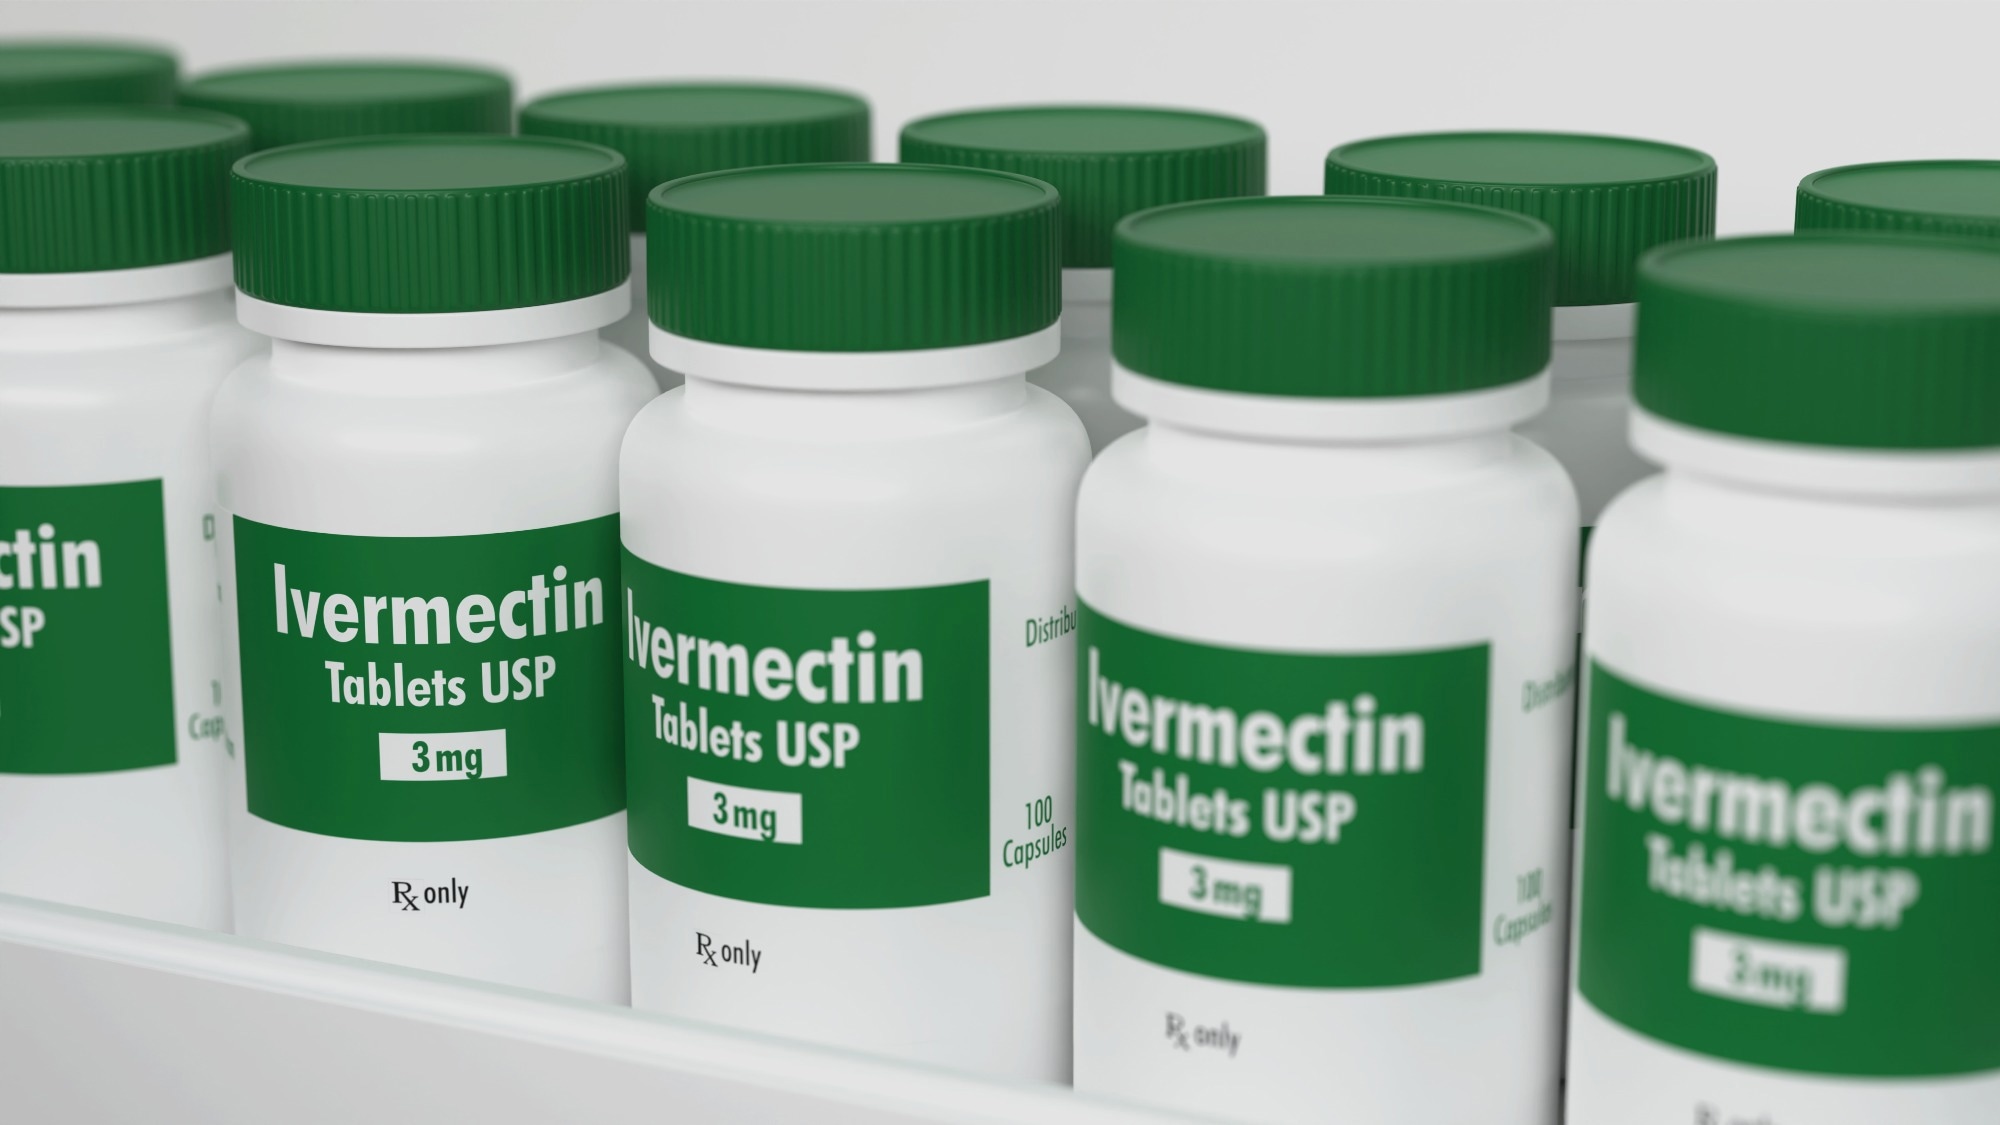 Study: Effect of Ivermectin vs. Placebo on Sustained Recovery Time in Outpatients with Mild to Moderate COVID-19.  Image Credit: Carl DMaster / Shutterstock